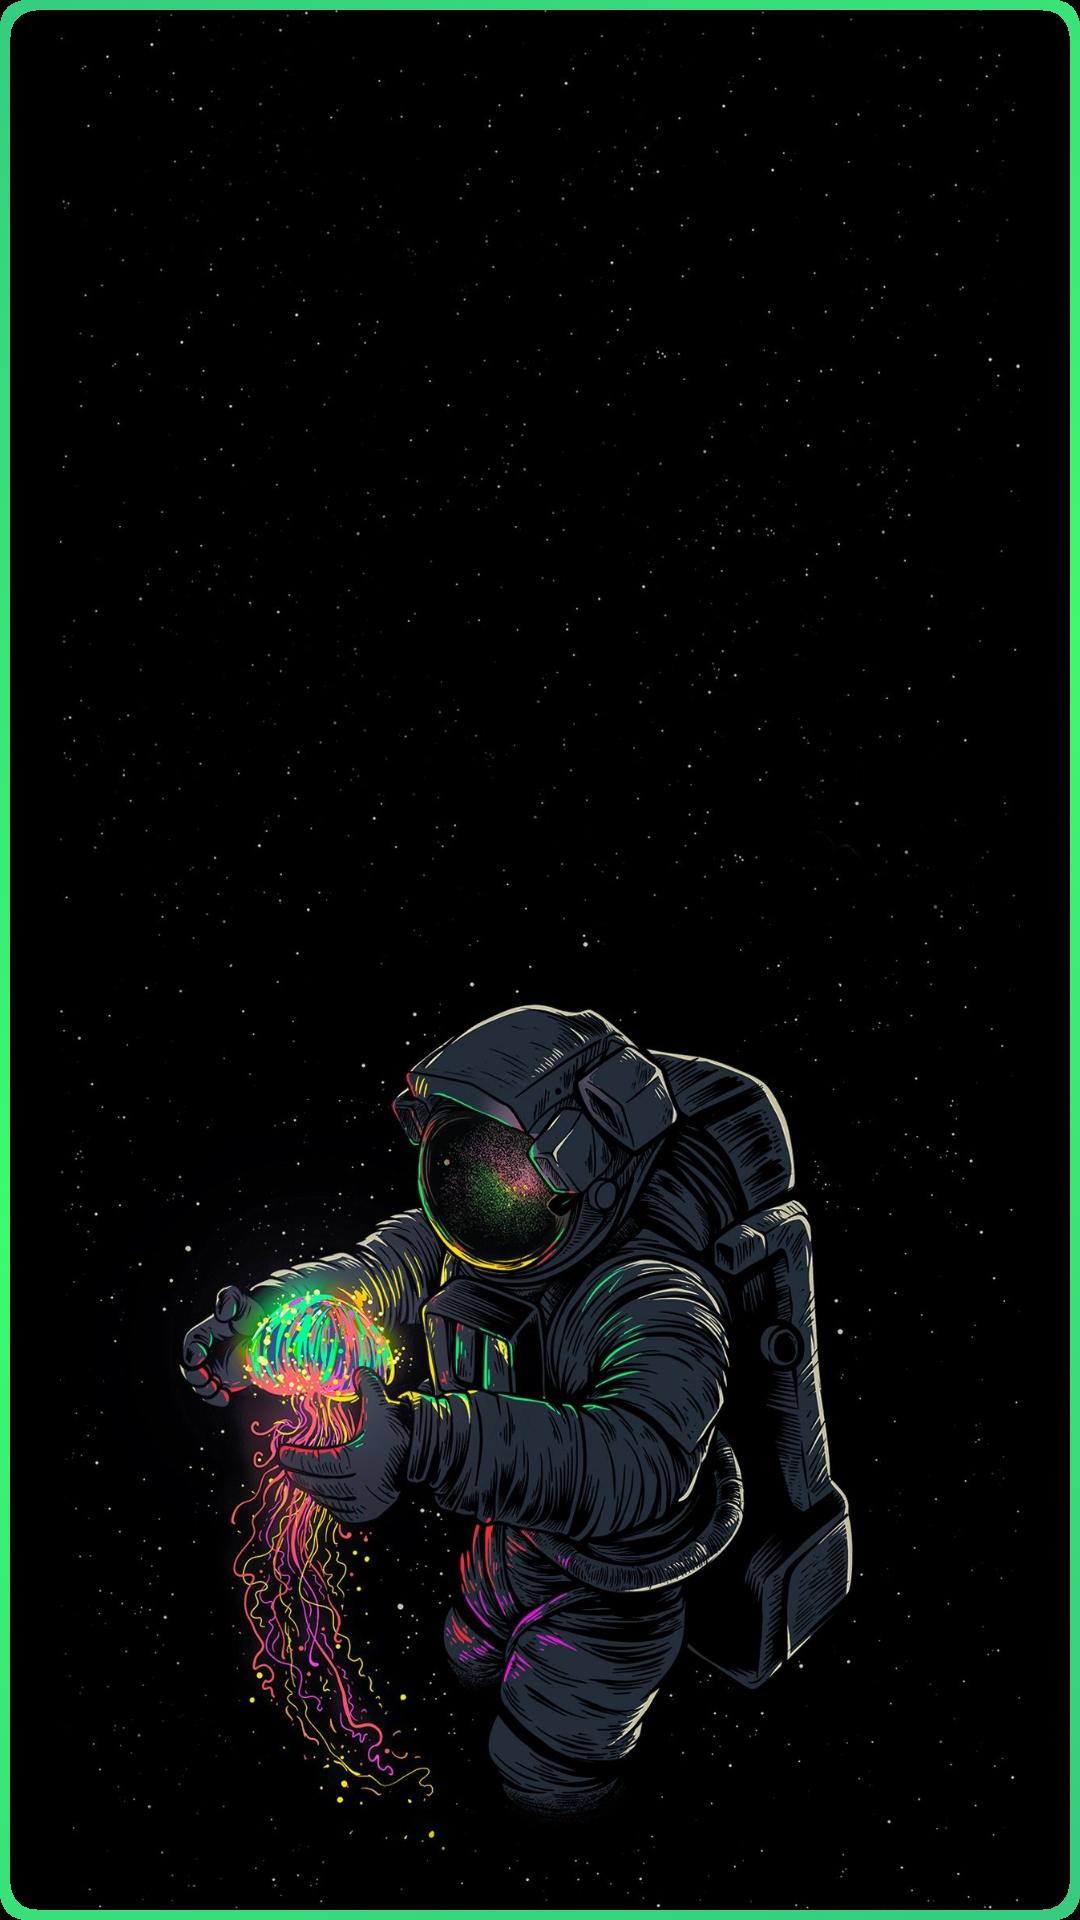 Edited this into a amoled wallpaper and added the coloured